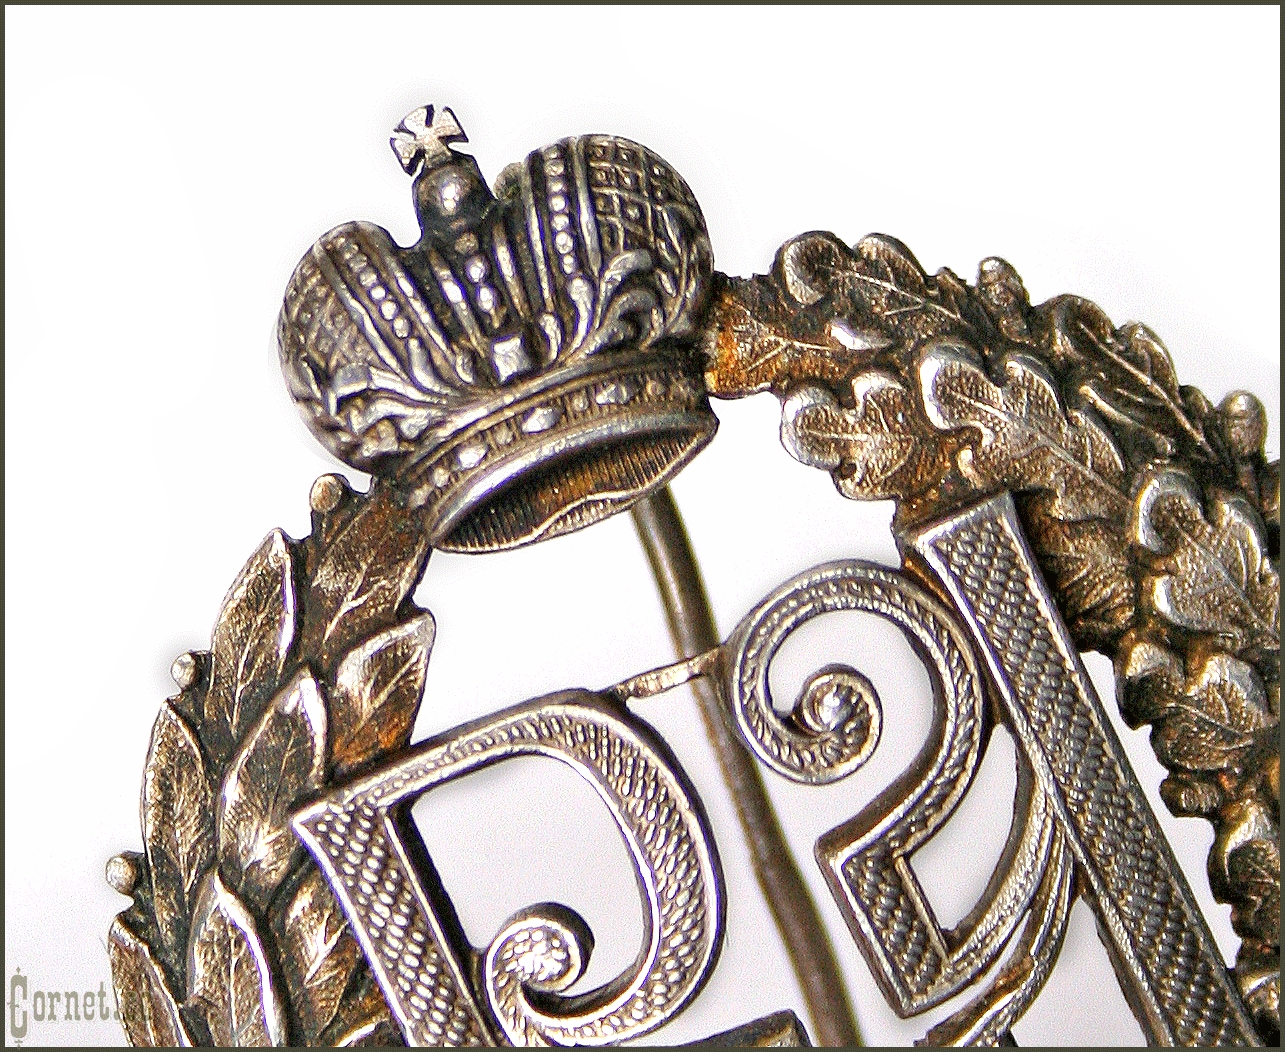 Award badge of the Imperial Russian Fire Society